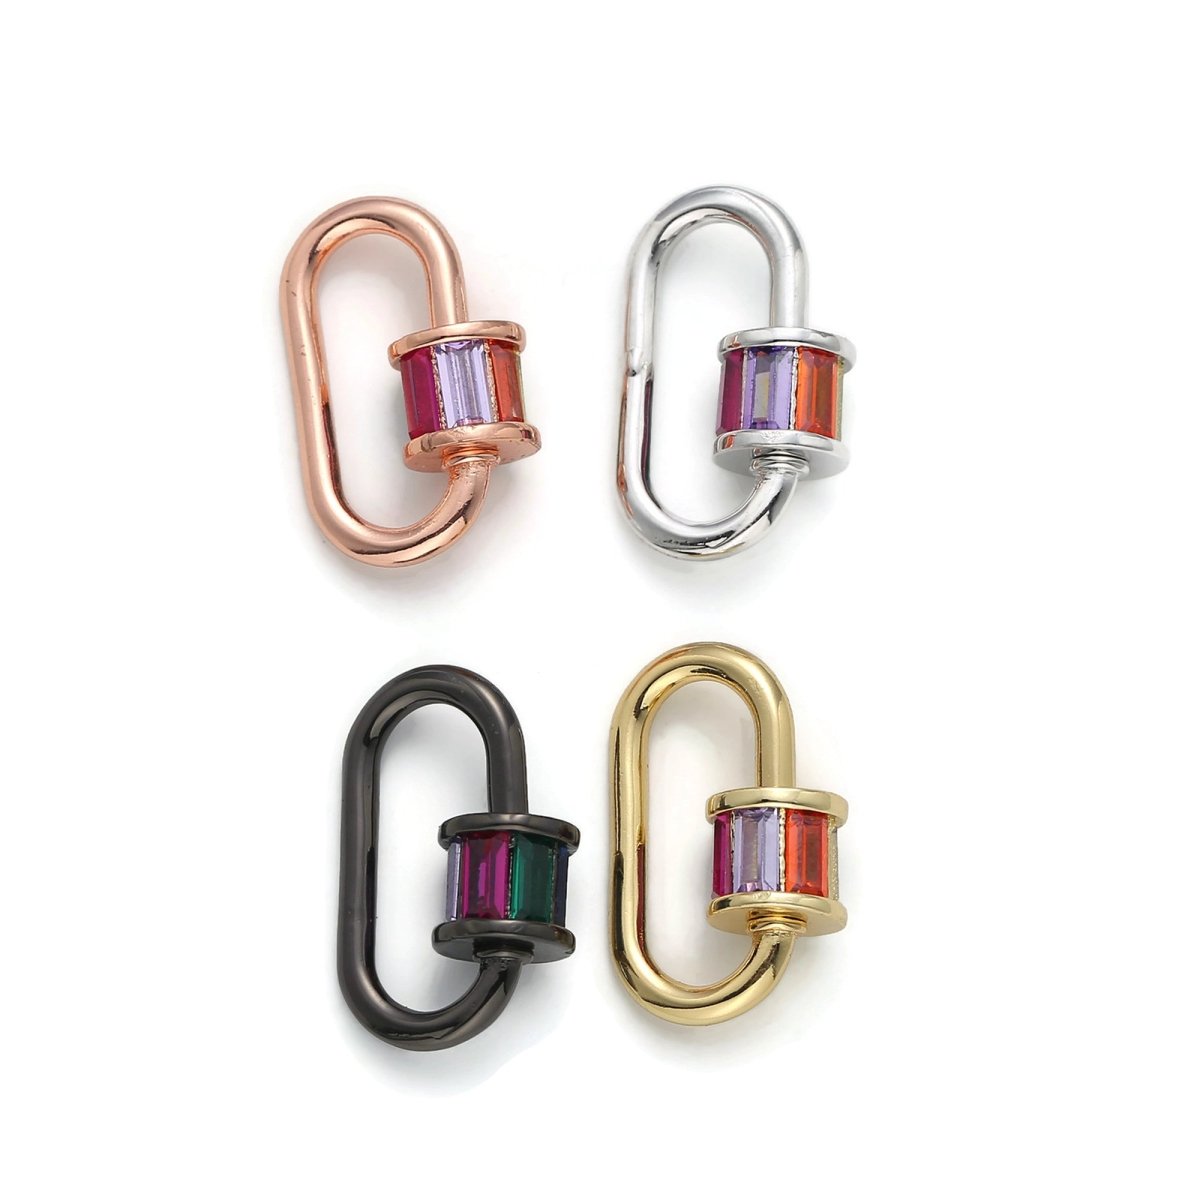 24K Gold-Plated Oval Carabiner, Screw Clasp with Multicolor Glass Panes, Gold, Rose Gold, Silver, or Black Color Options - DLUXCA